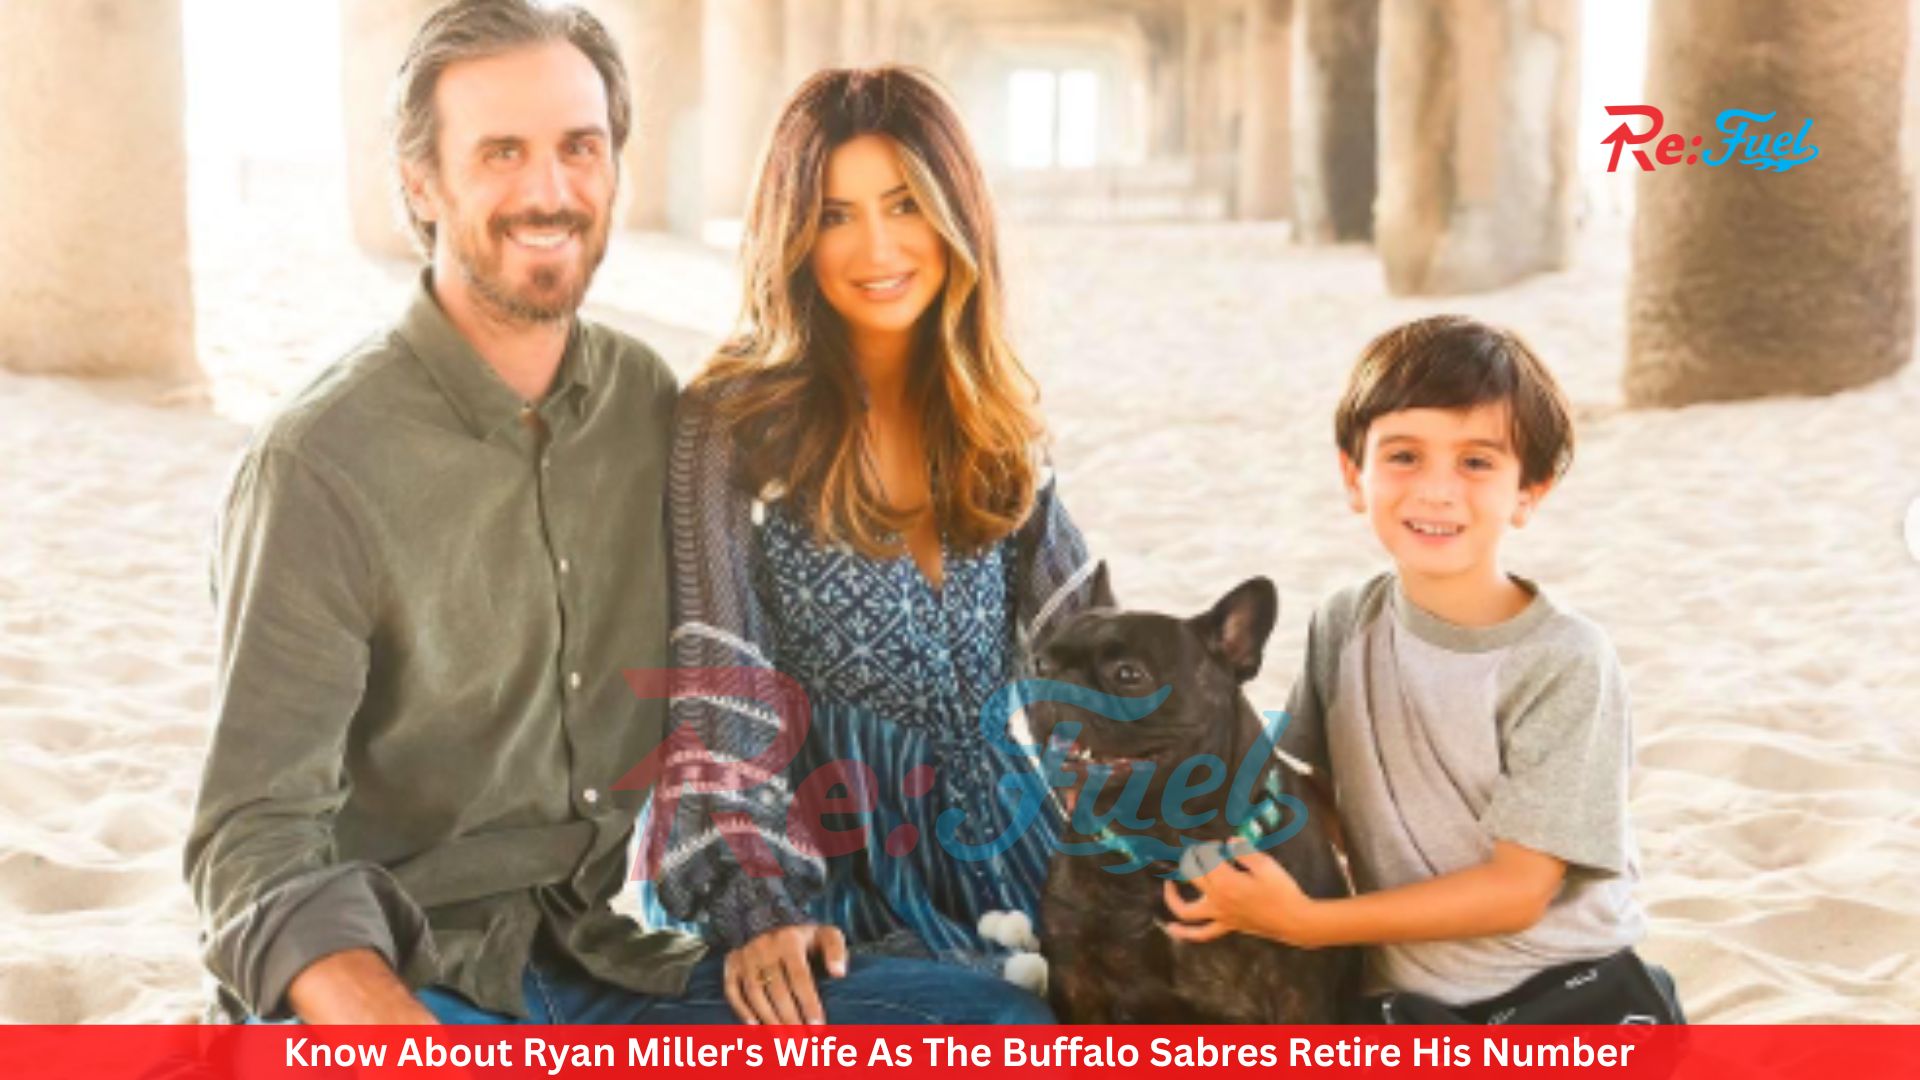 Know About Ryan Miller's Wife As The Buffalo Sabres Retire His Number